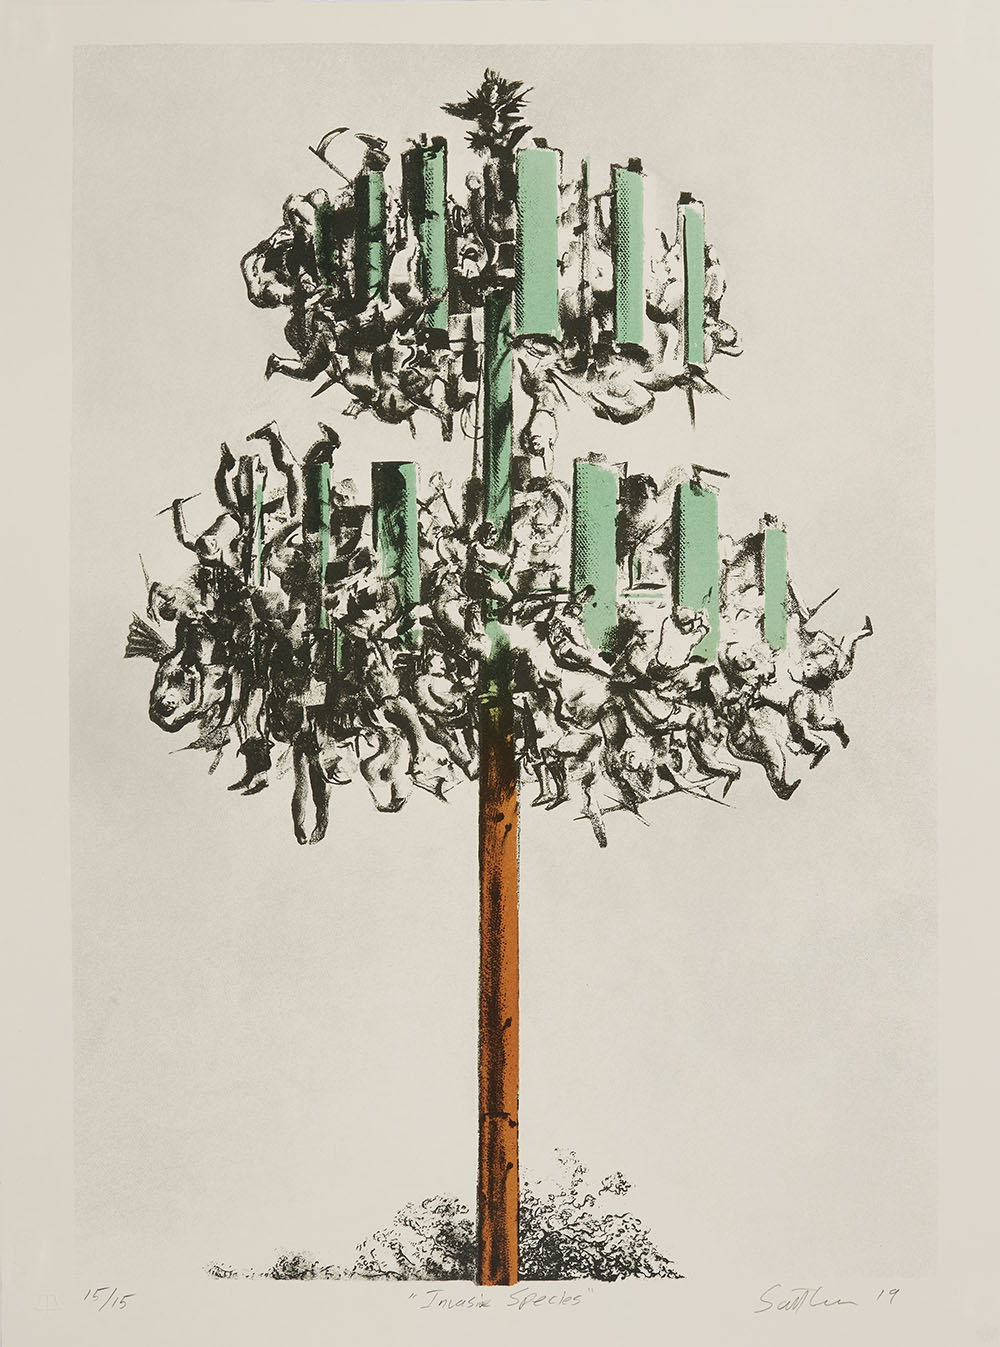 Four-color lithograph by Scott Greene. Tree composed of green and brown wood planks and groups of human limbs in gray tones taking the place of leaves.